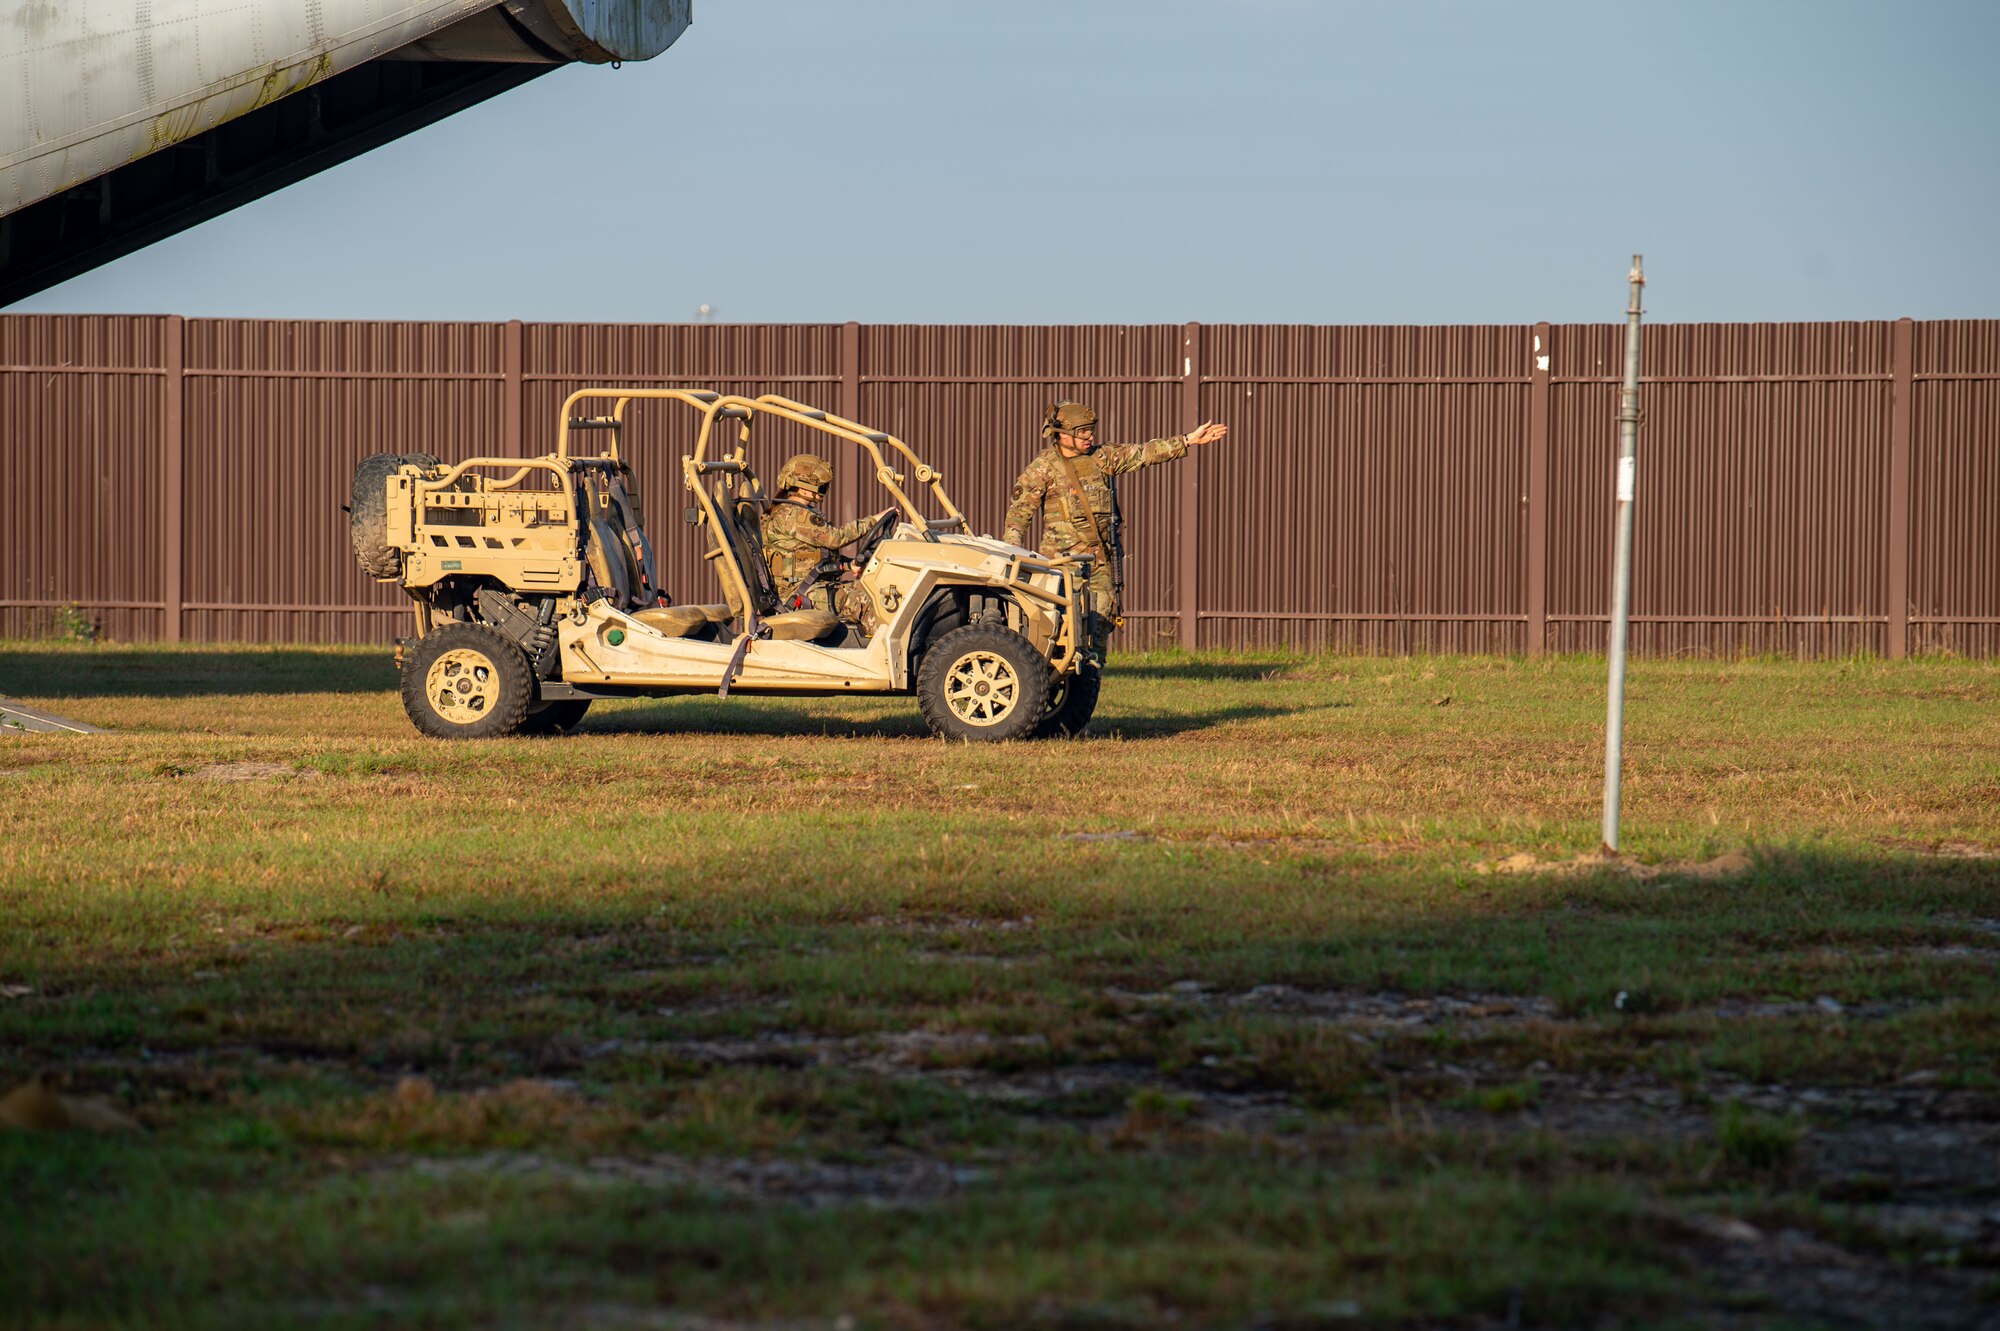 U.S. Air Force Airmen assigned to the 820th Base Defense Squadron operate an MRZR at Moody Air Force Base, Georgia, March 15, 2024. As part of Women in Aviation Week, the 820 BDG practiced infiltrating a simulated village after exiting a C-130 aircraft trainer. Team Moody’s annual WIA events aim to highlight aviation-related career fields and inspire local youth to consider futures in the Air Force. (U.S. Air Force photo by Airman 1st Class Iain Stanley)